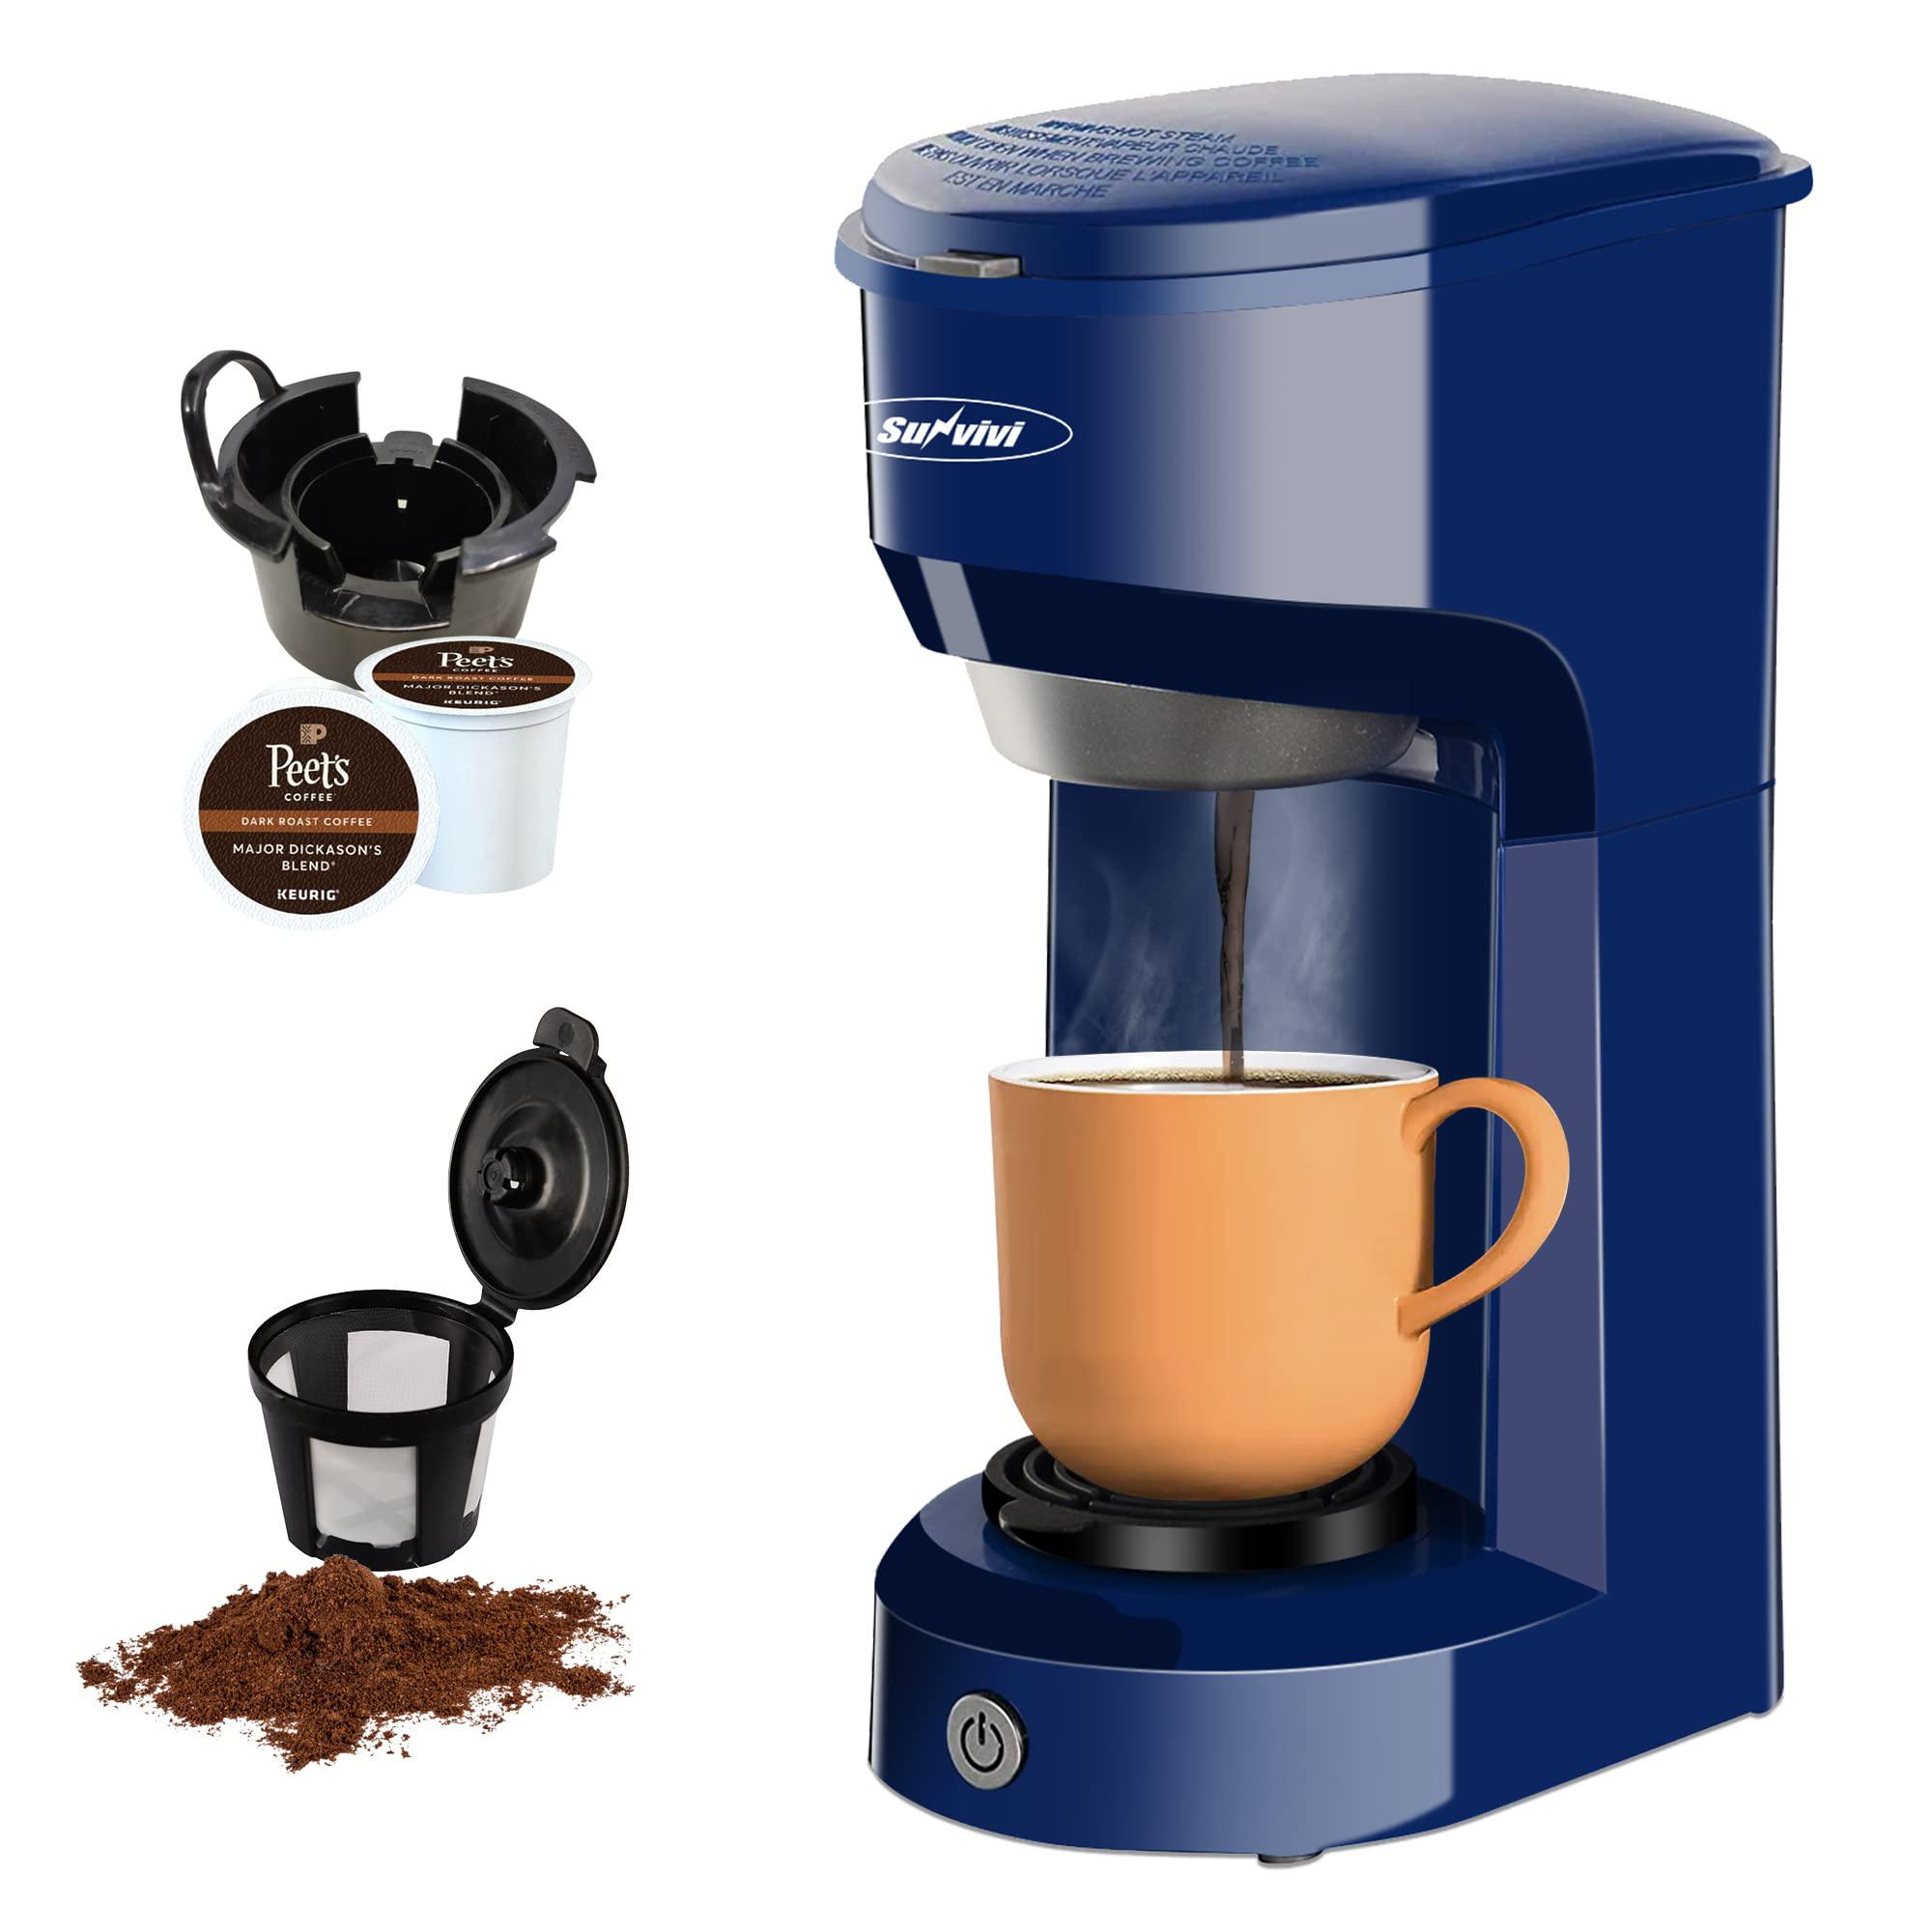 X WINDAZE RNAB0BCDJMGX7 x windaze single serve coffee maker for k cup &  ground coffee, mini one cup coffee brewer with filter 6-14oz reservoir  streng